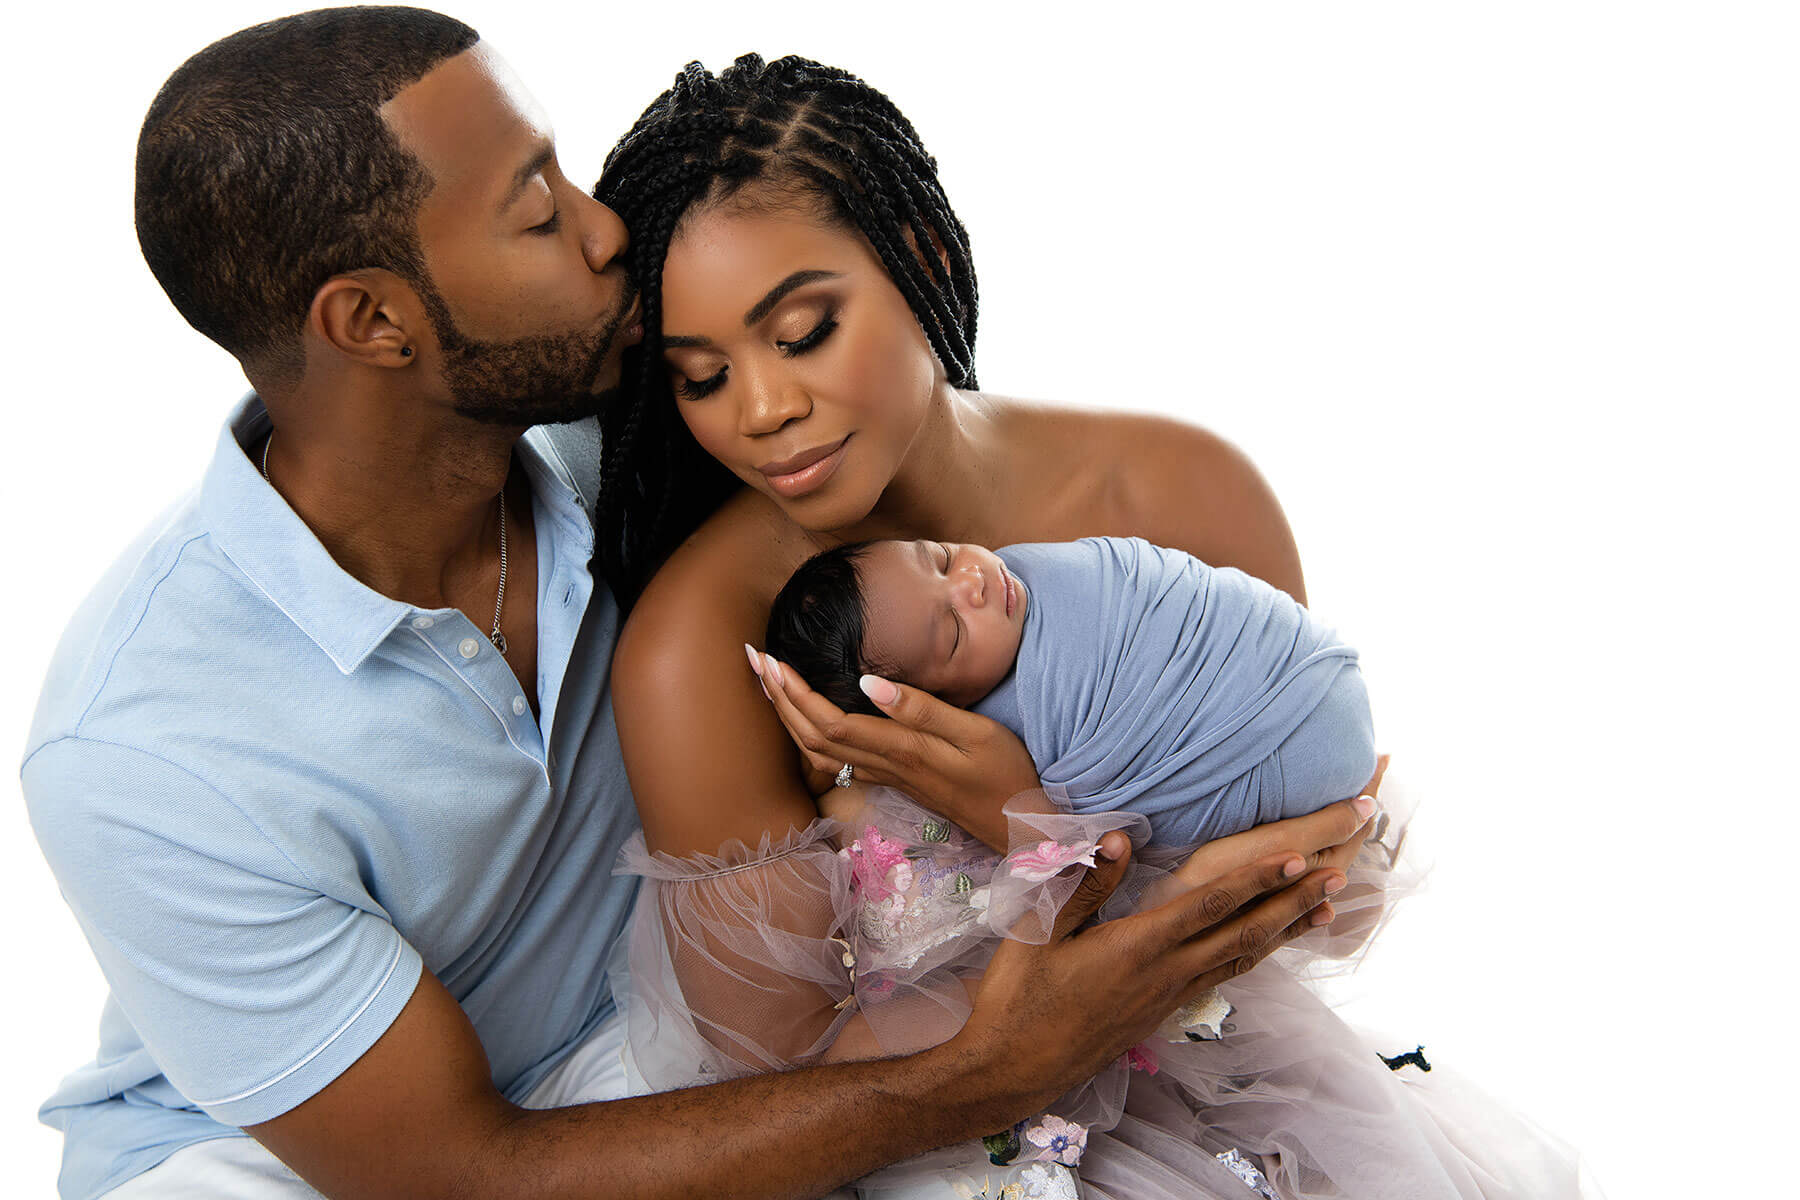 family photography ideas for newborn photo session